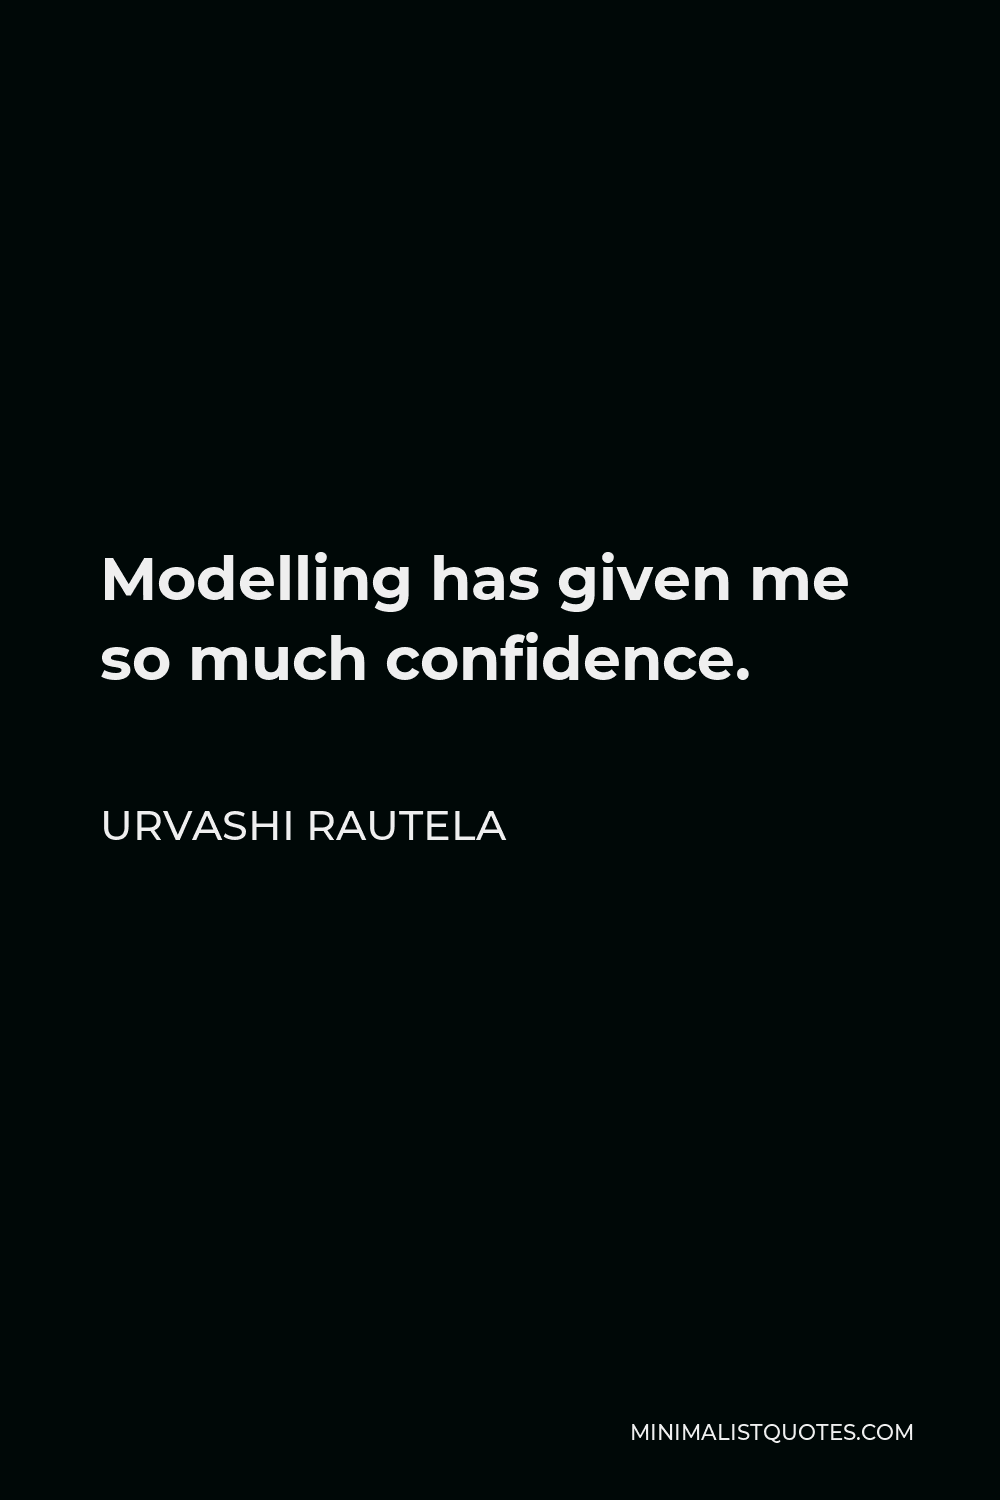 Urvashi Rautela Quote - Modelling has given me so much confidence.